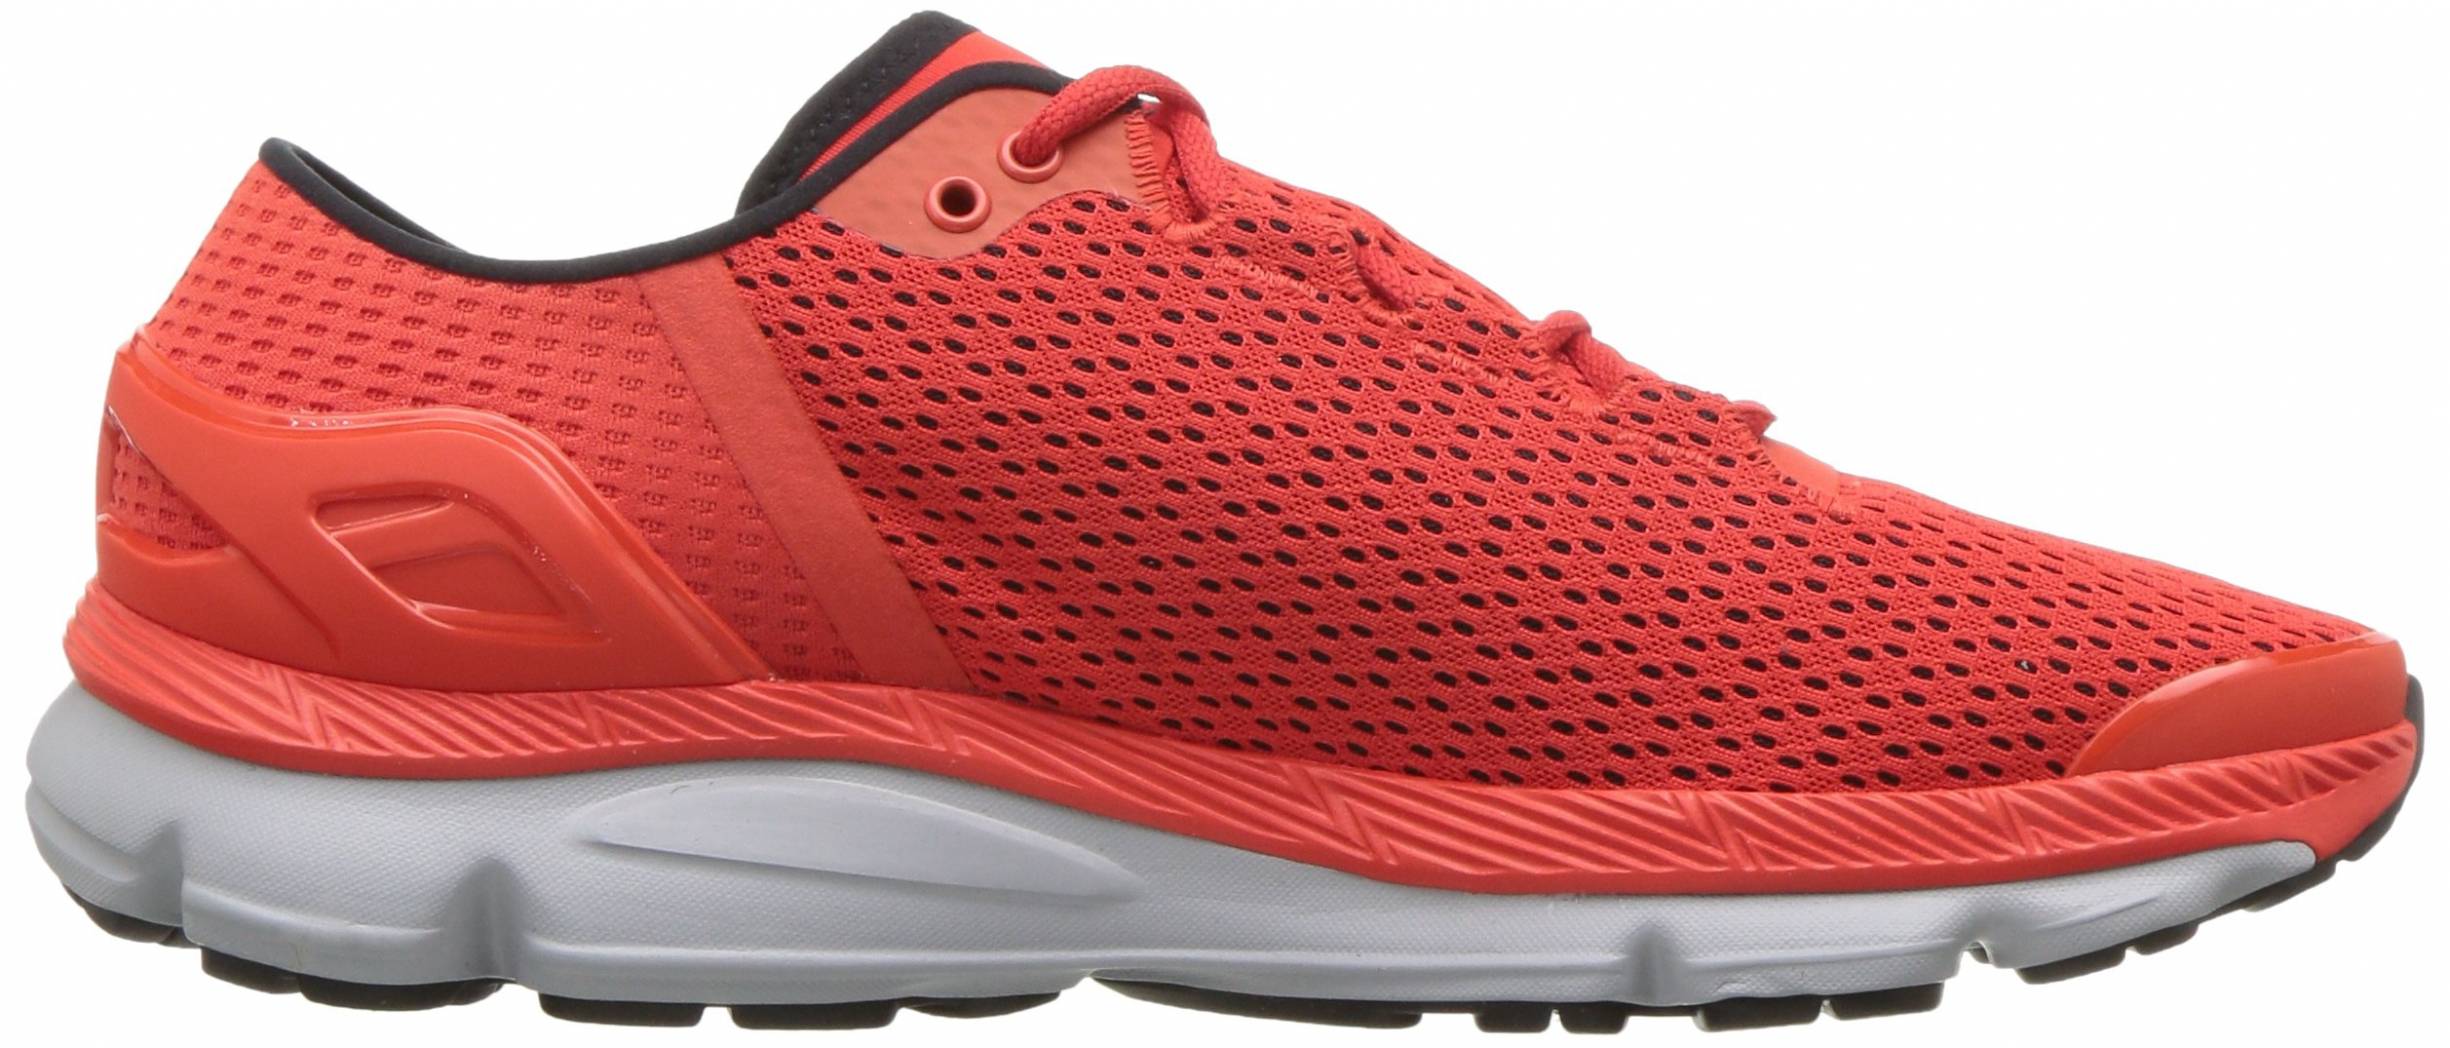 Under Armour SpeedForm Intake 2 Review 2022, Facts, Deals ($73) | RunRepeat